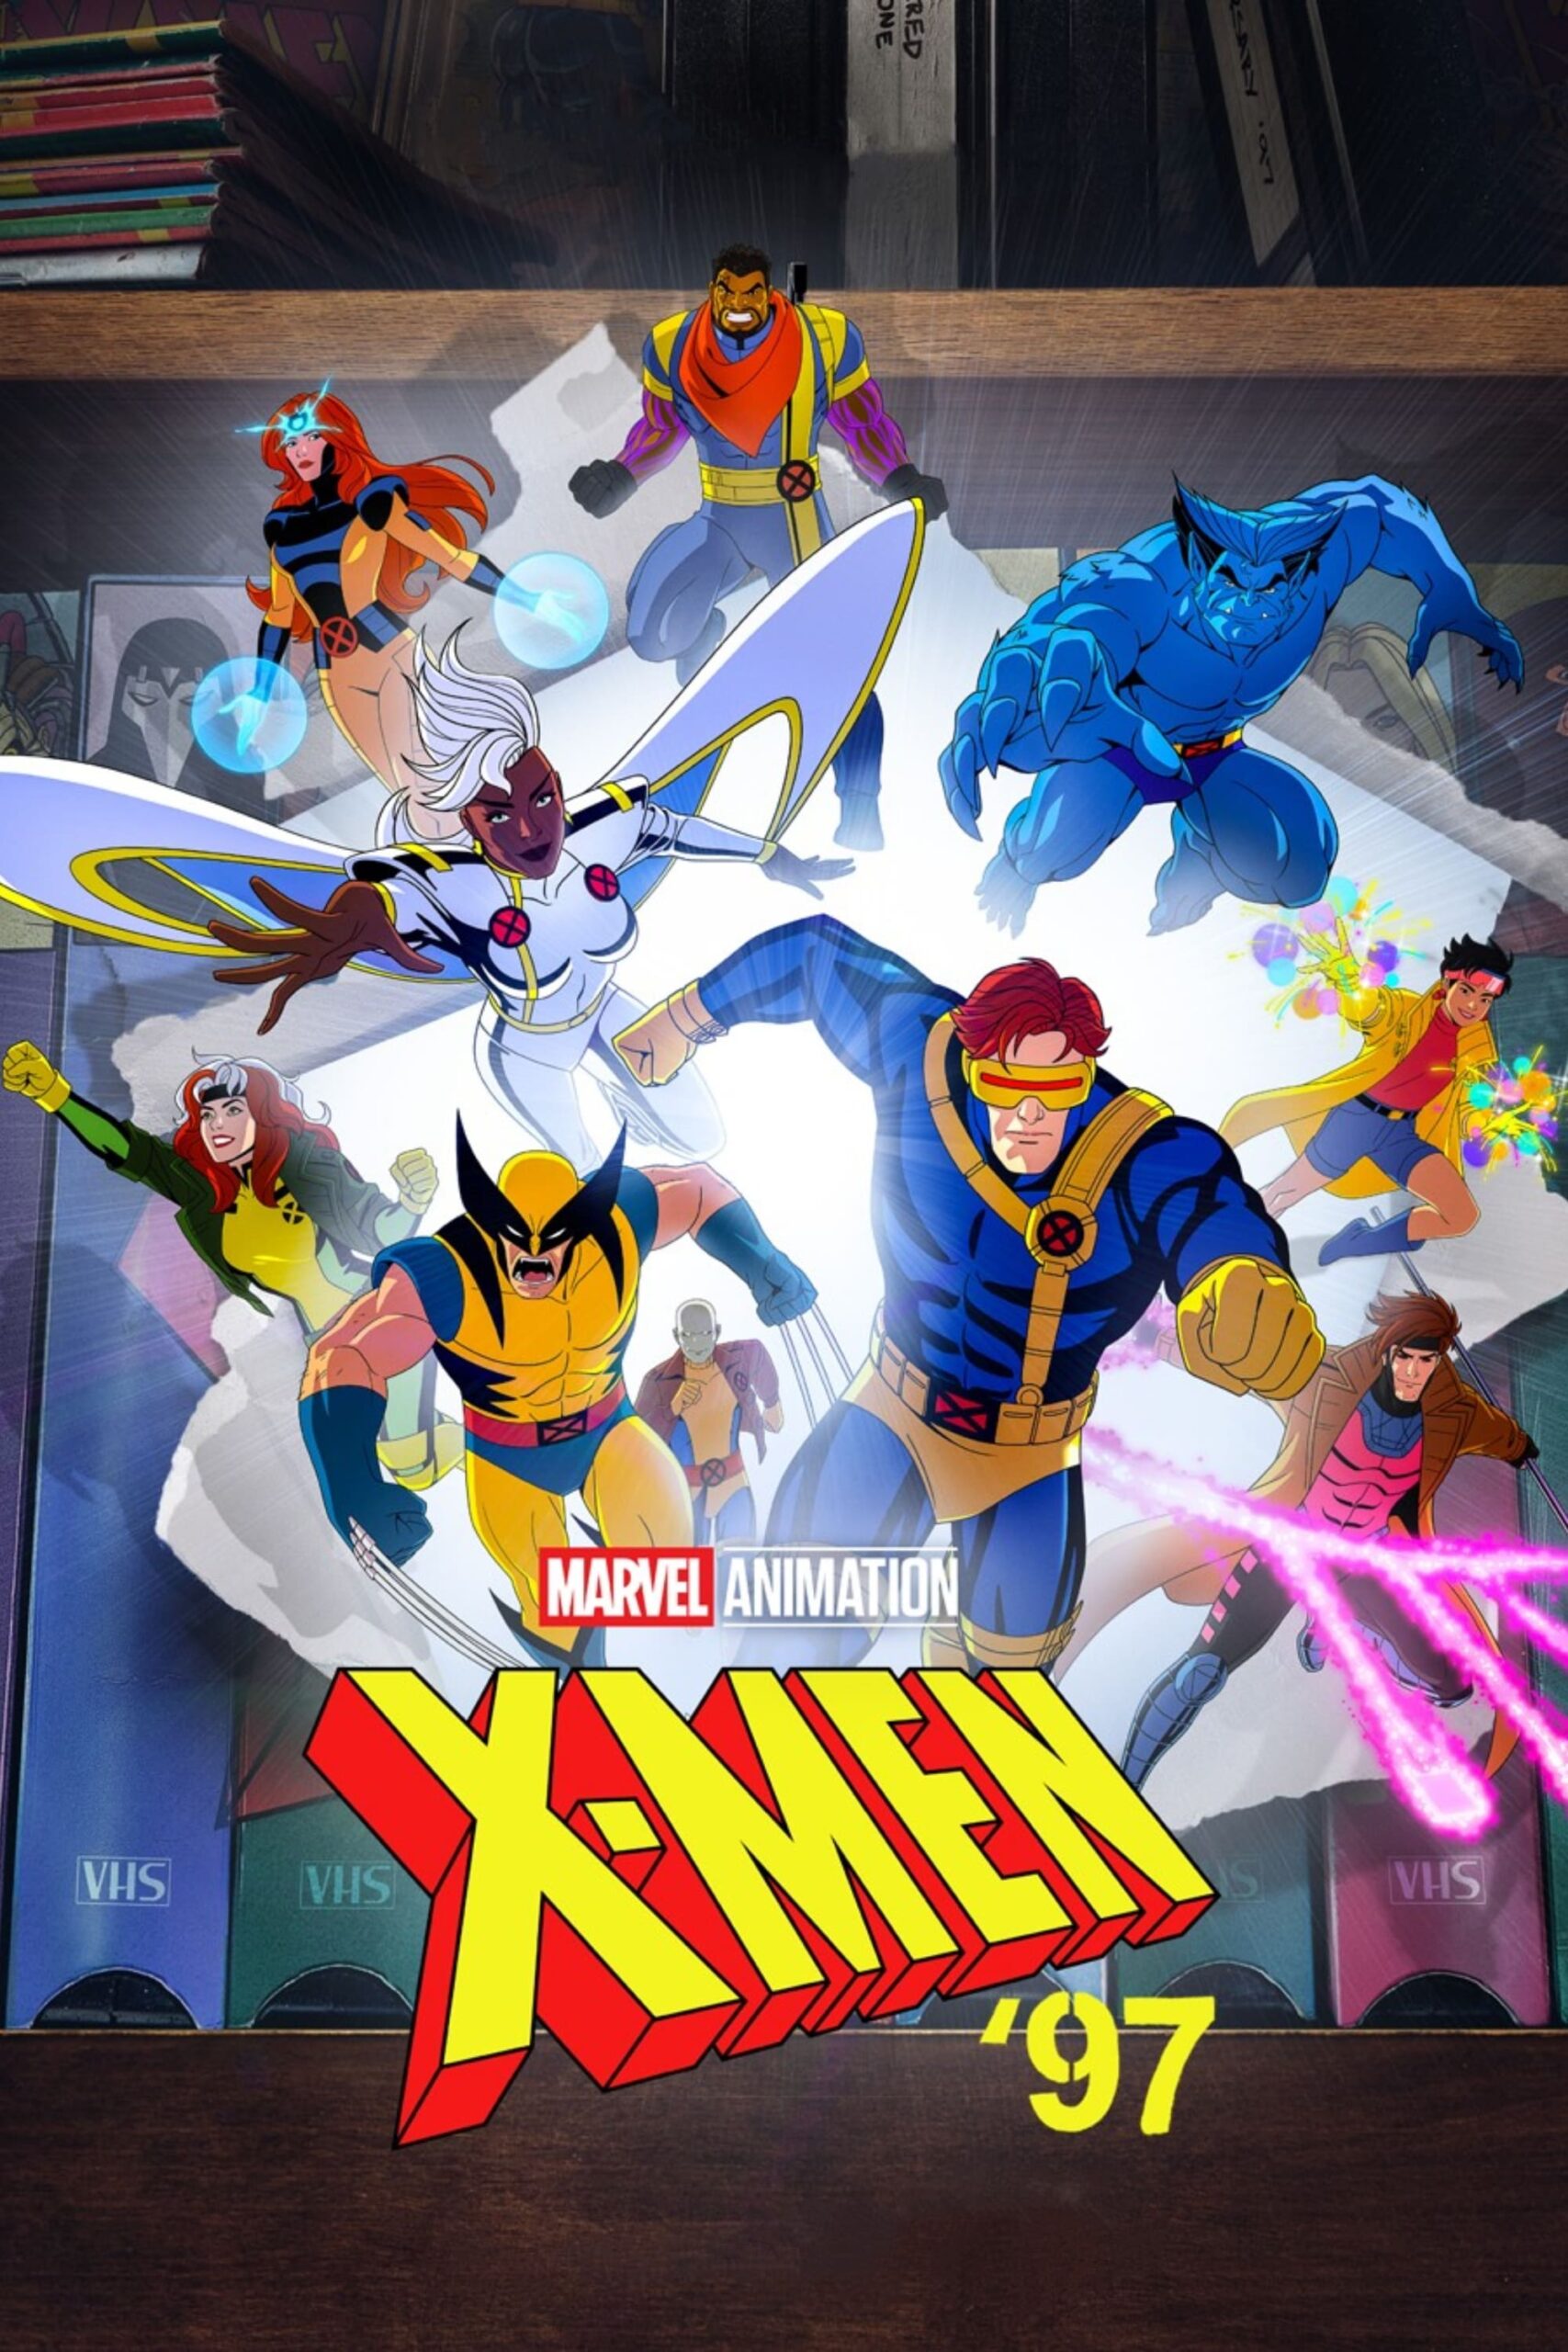 X-Men 97’s First Four Episodes Are A Breath of Fresh Air From MCU Multiverse Boogaloo